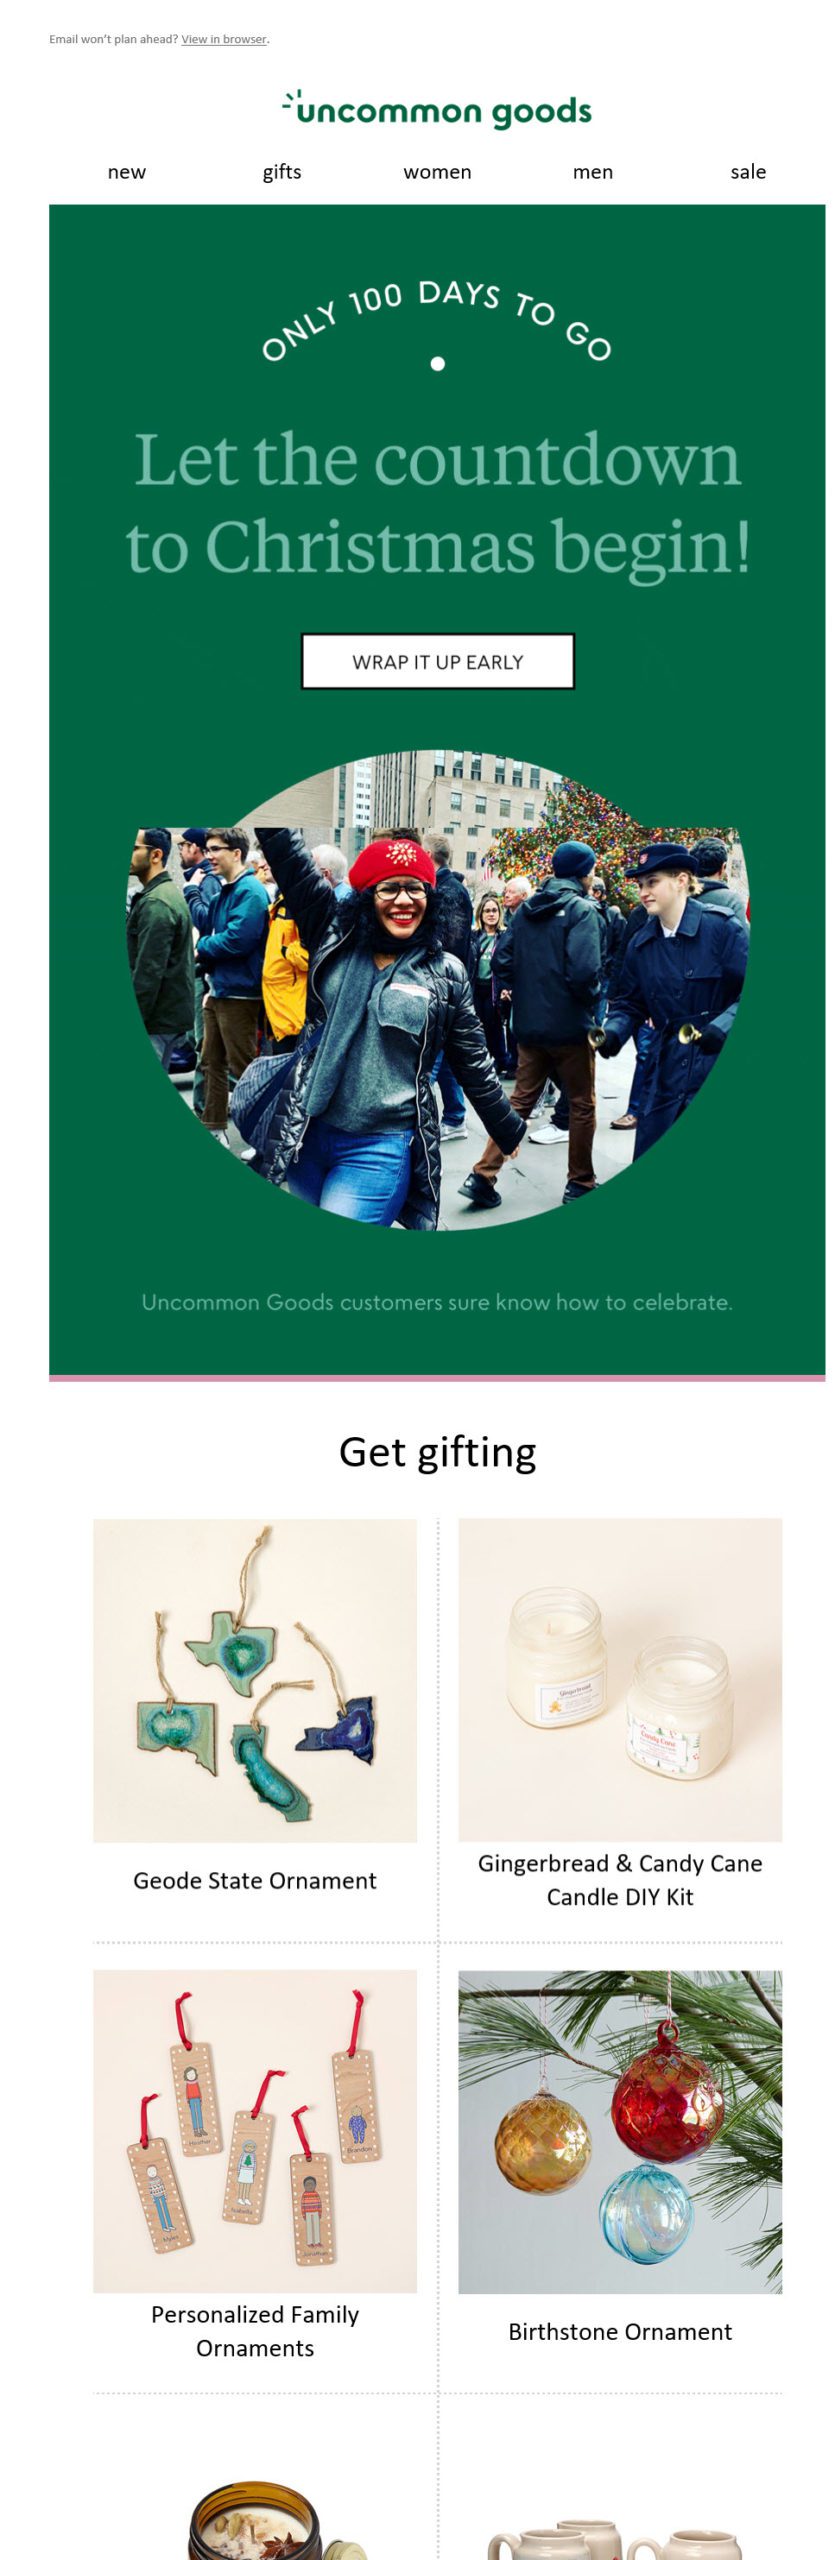 Web-only merchant UncommonGoods emailed shoppers on Sept. 16 encouraging them to "get gifting."